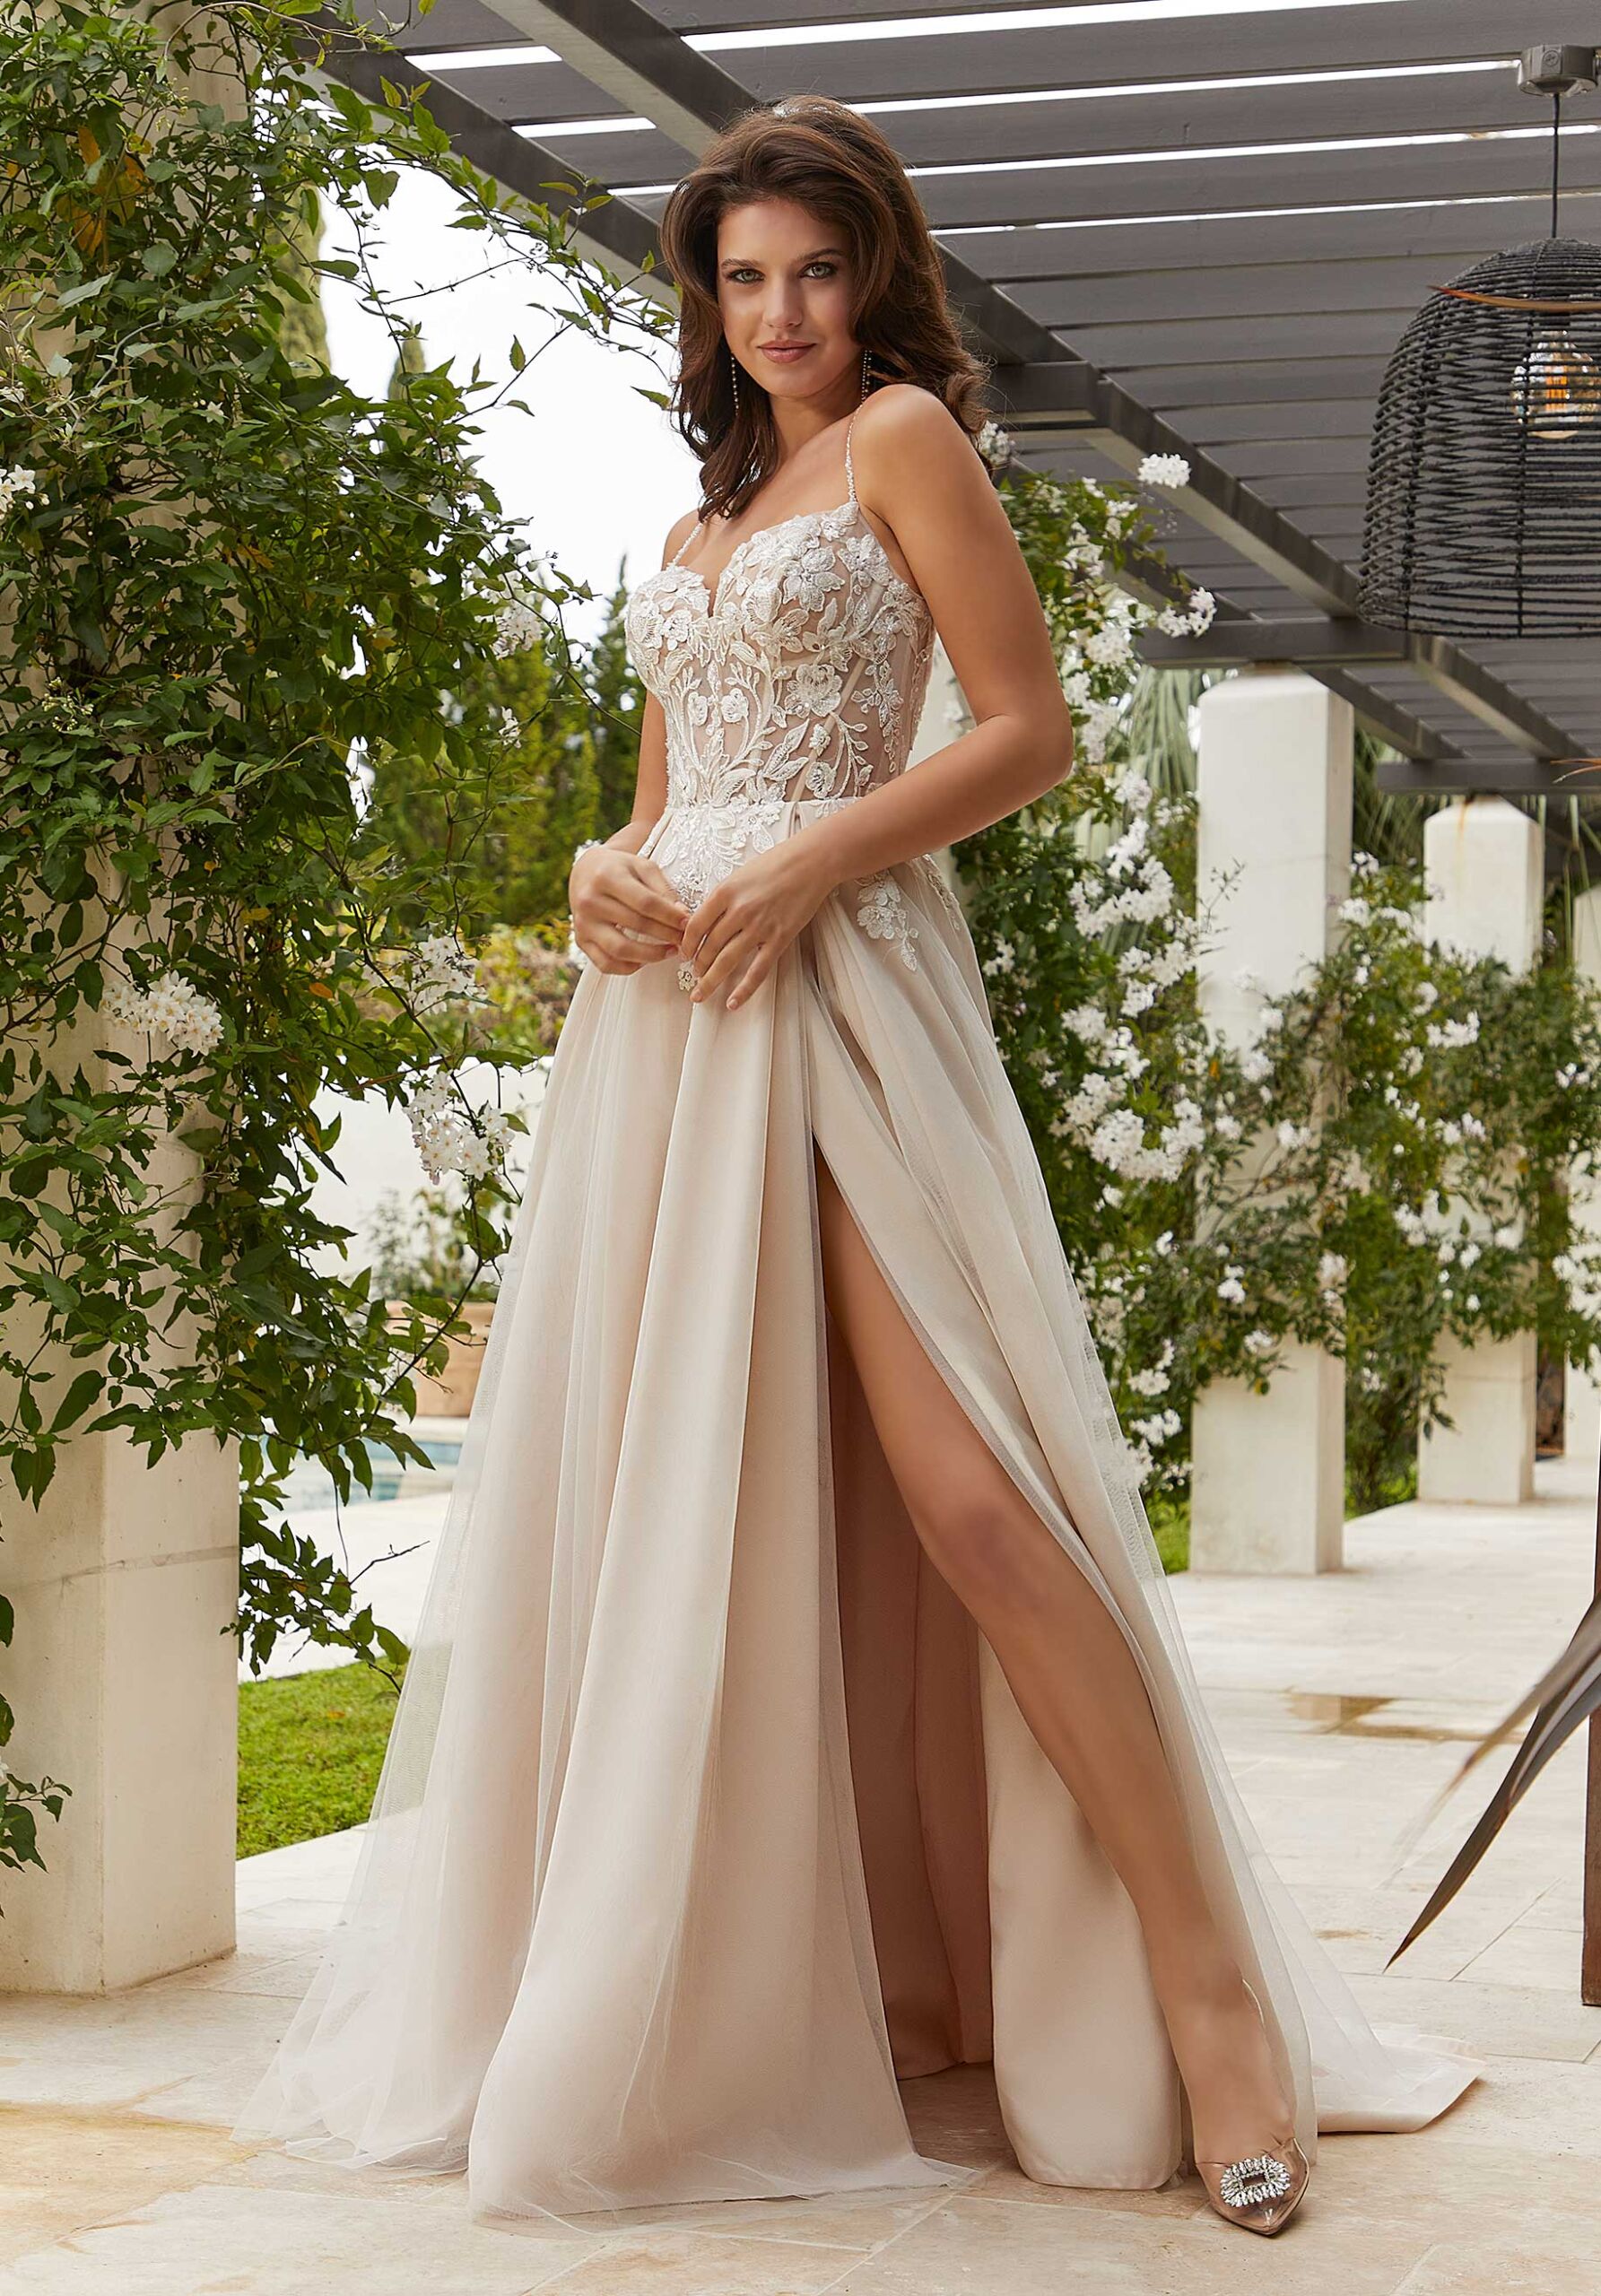 Pastel and Floral Gowns by Maggie Sottero Designs - Love Maggie